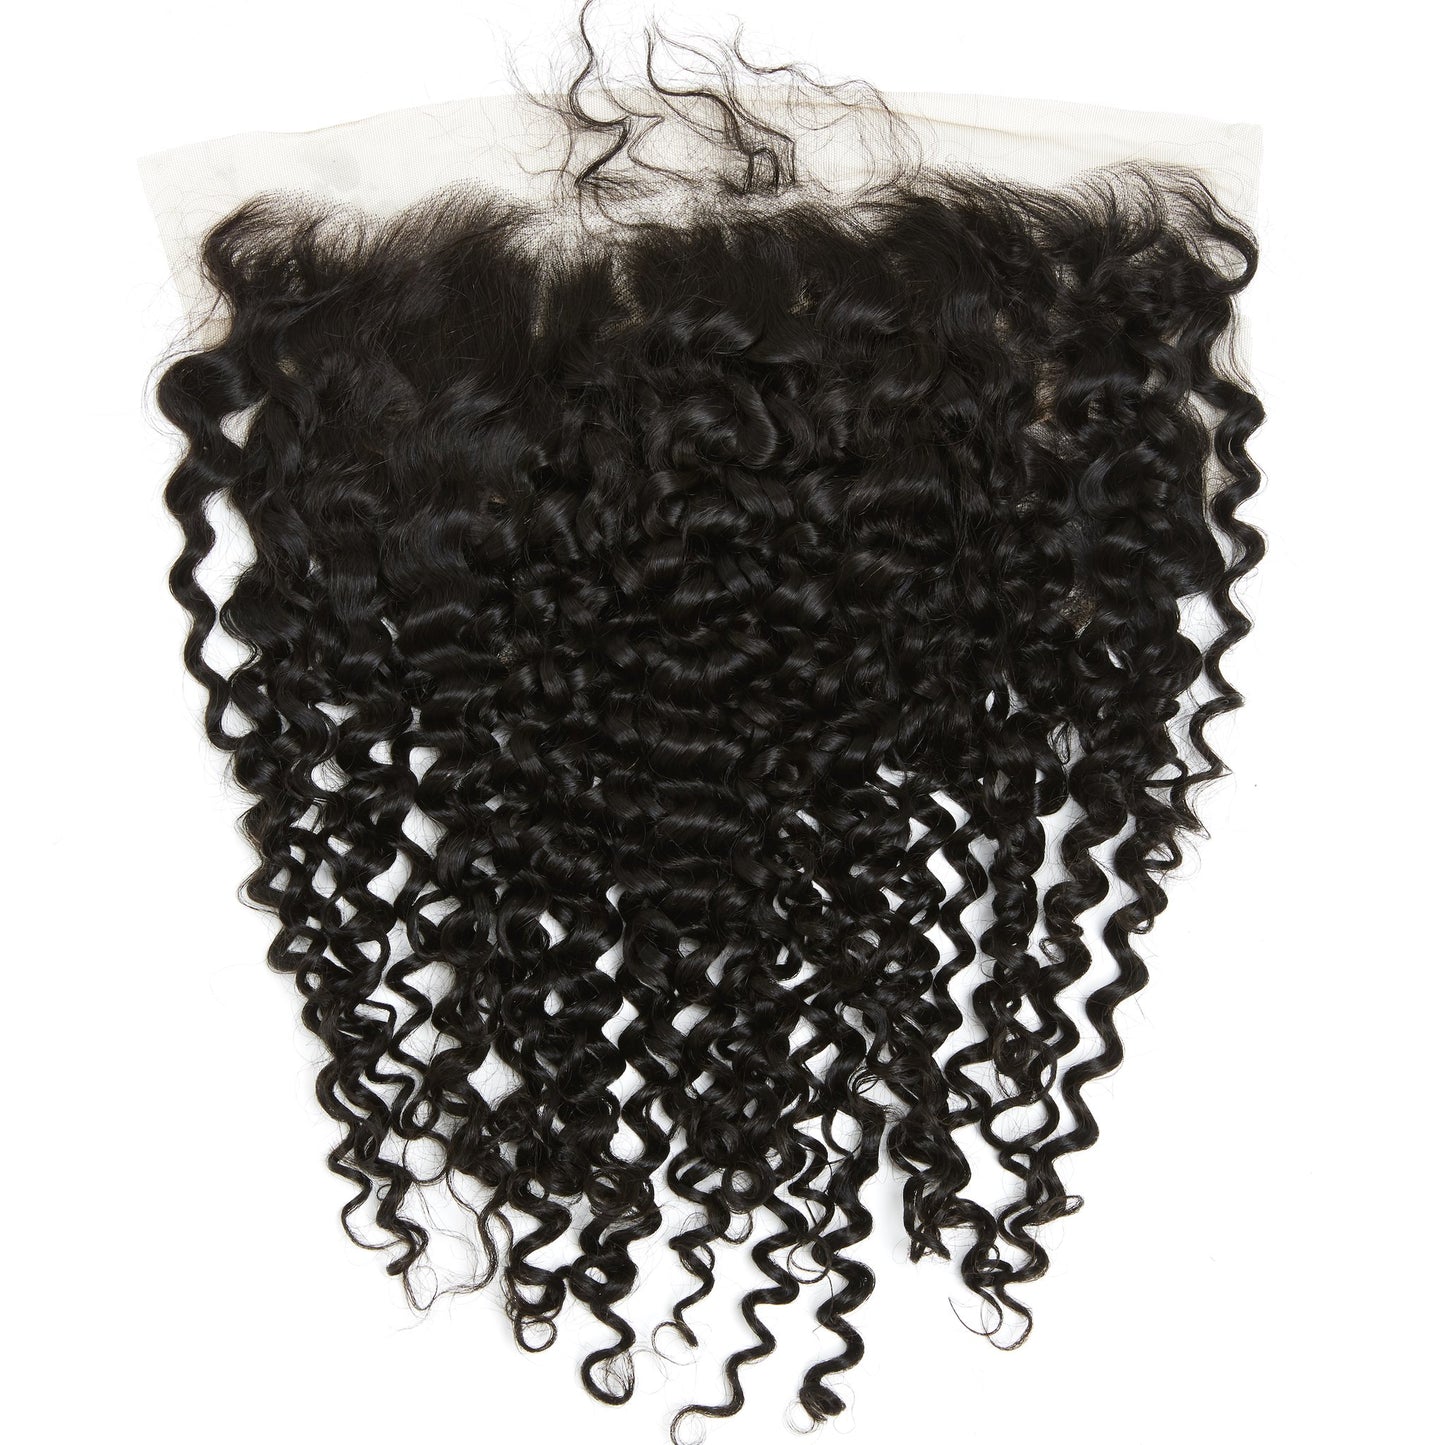 CAMBODIAN DEEP CURLY LACE FRONTAL